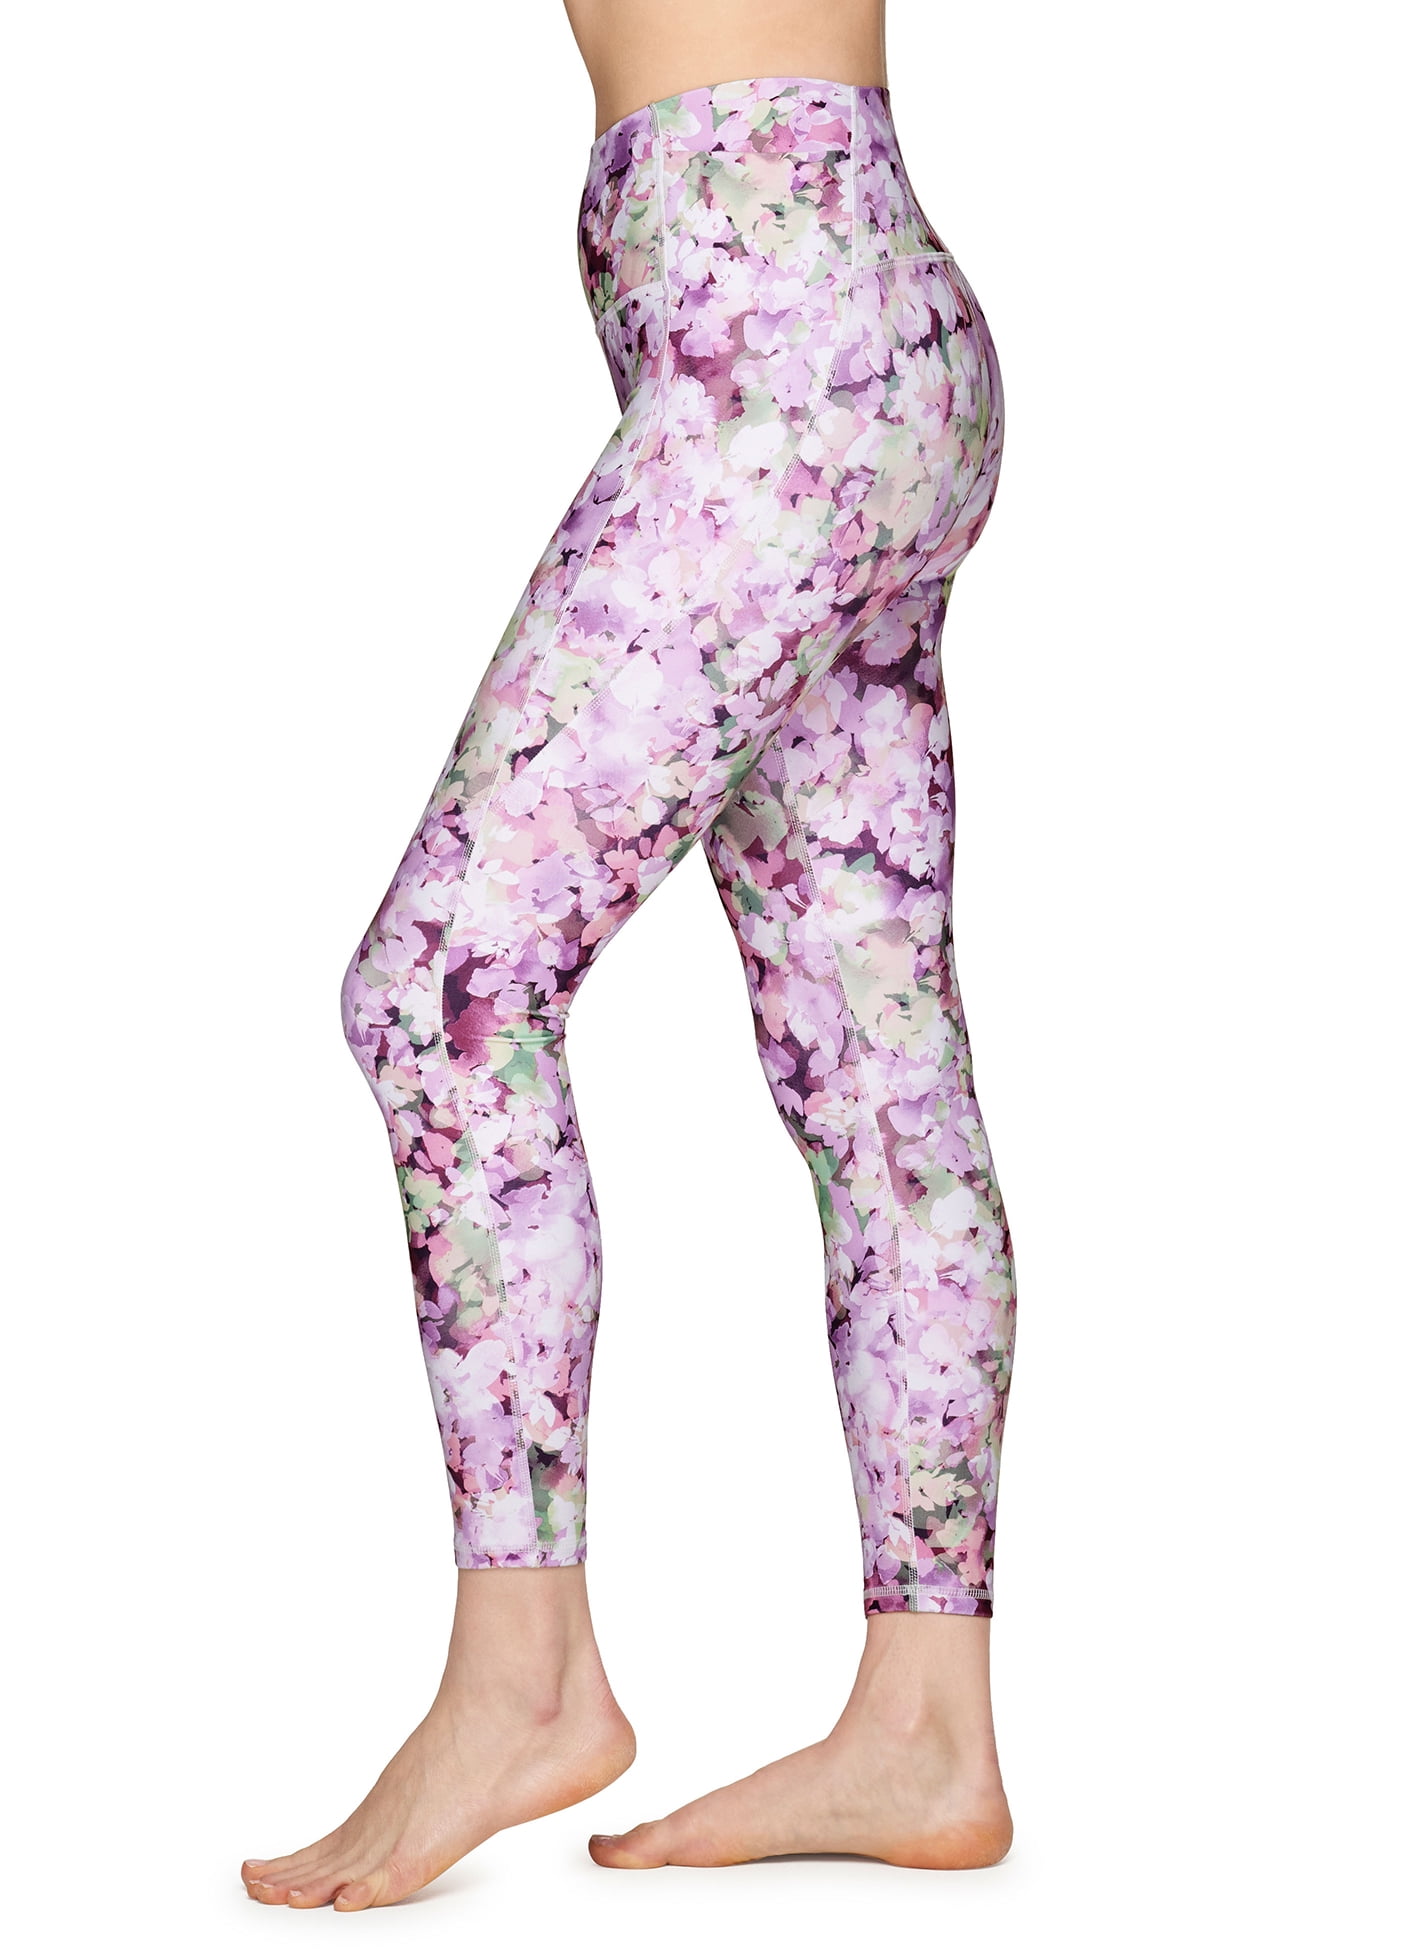 Gym Flower Leggings for Women SECRET GARDEN E-store  - Polish  manufacturer of sportswear for fitness, Crossfit, gym, running. Quick  delivery and easy return and exchange